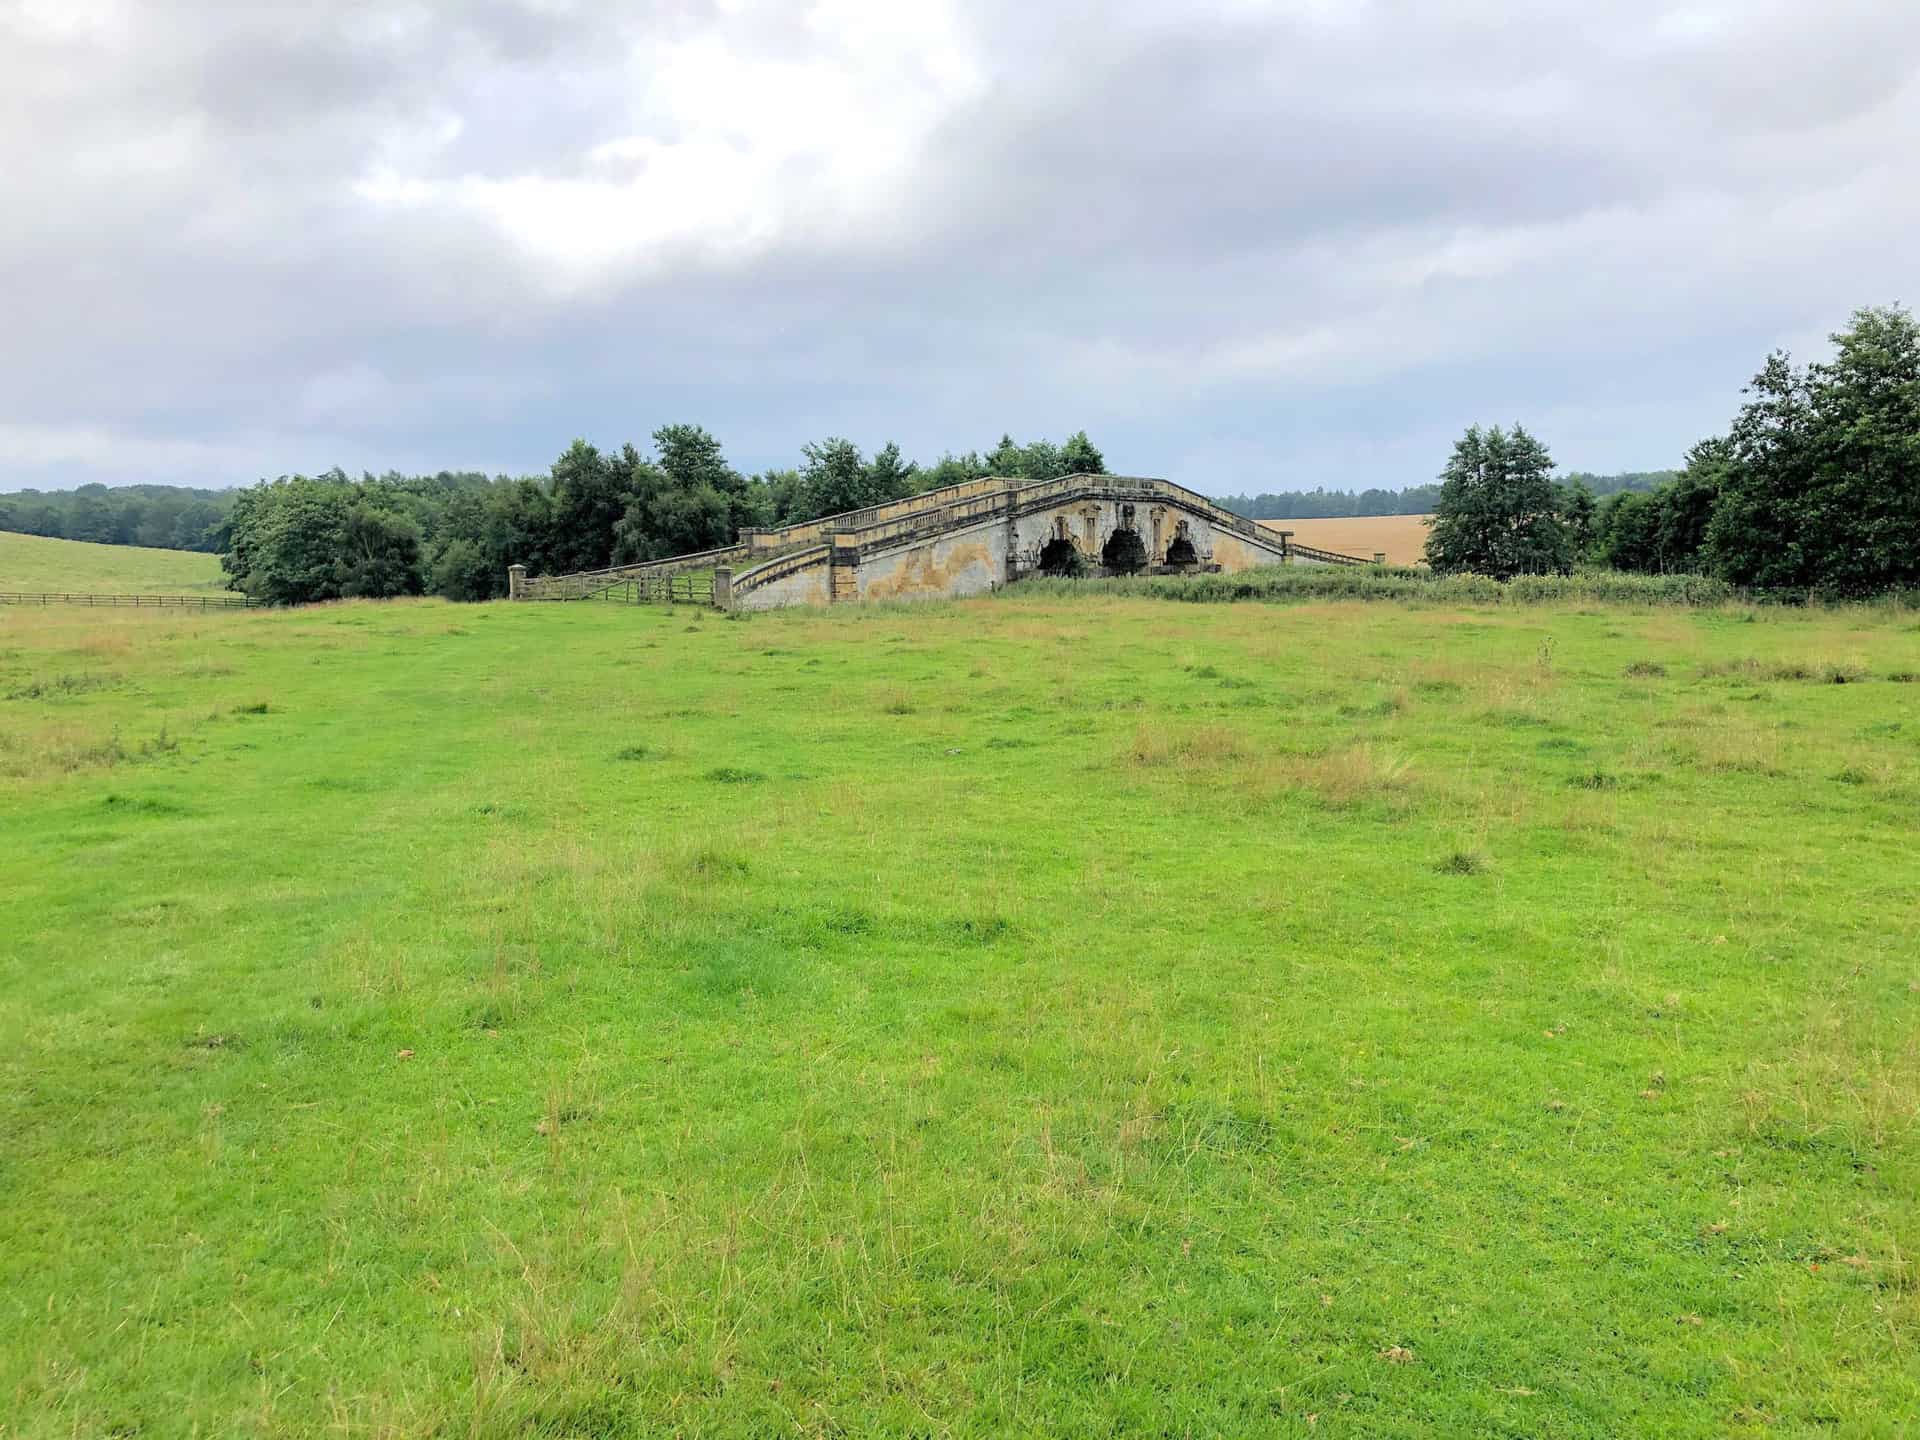 New River Bridge spans New River on the Castle Howard estate. It is a sandstone bridge dating from the 1740s and is a Grade 1 listed building.